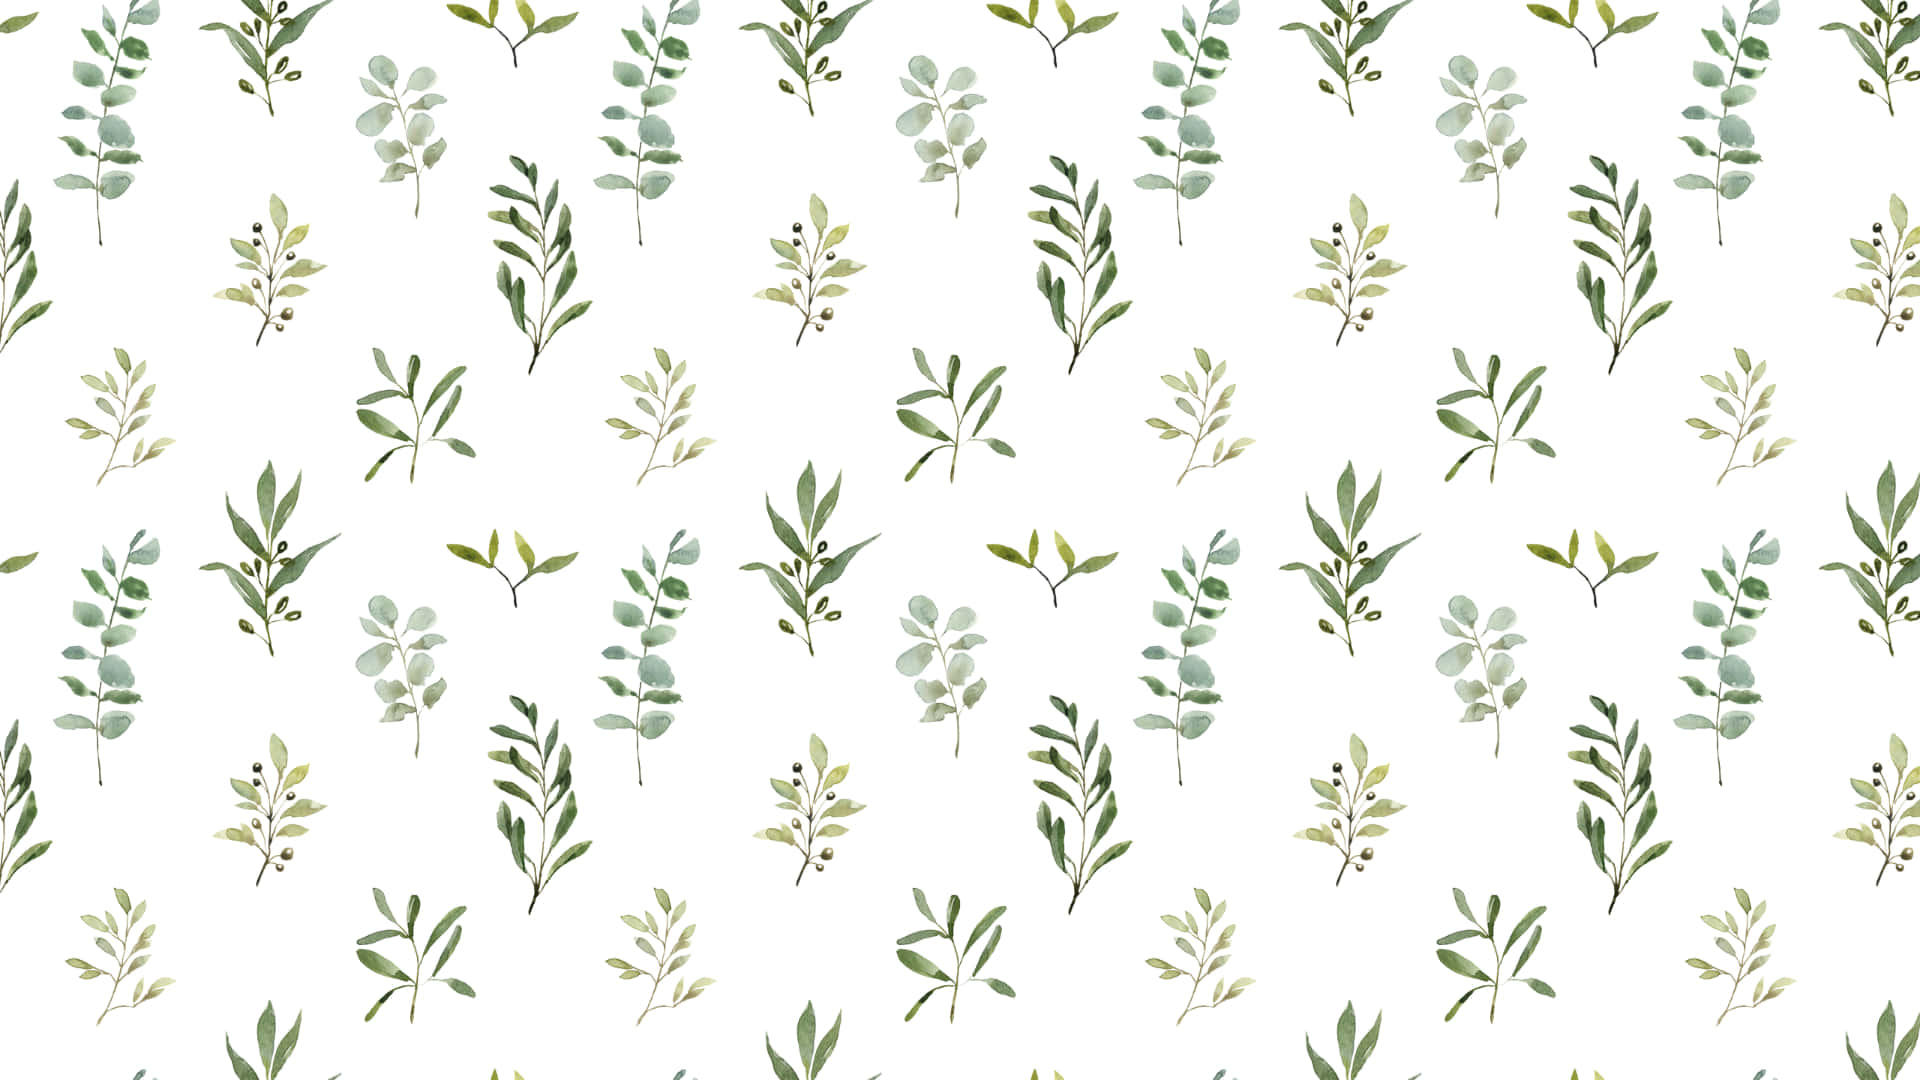 SHOP OUR GREEN WALLPAPER SAGE GREEN  EMERALD GREEN  OLIVE